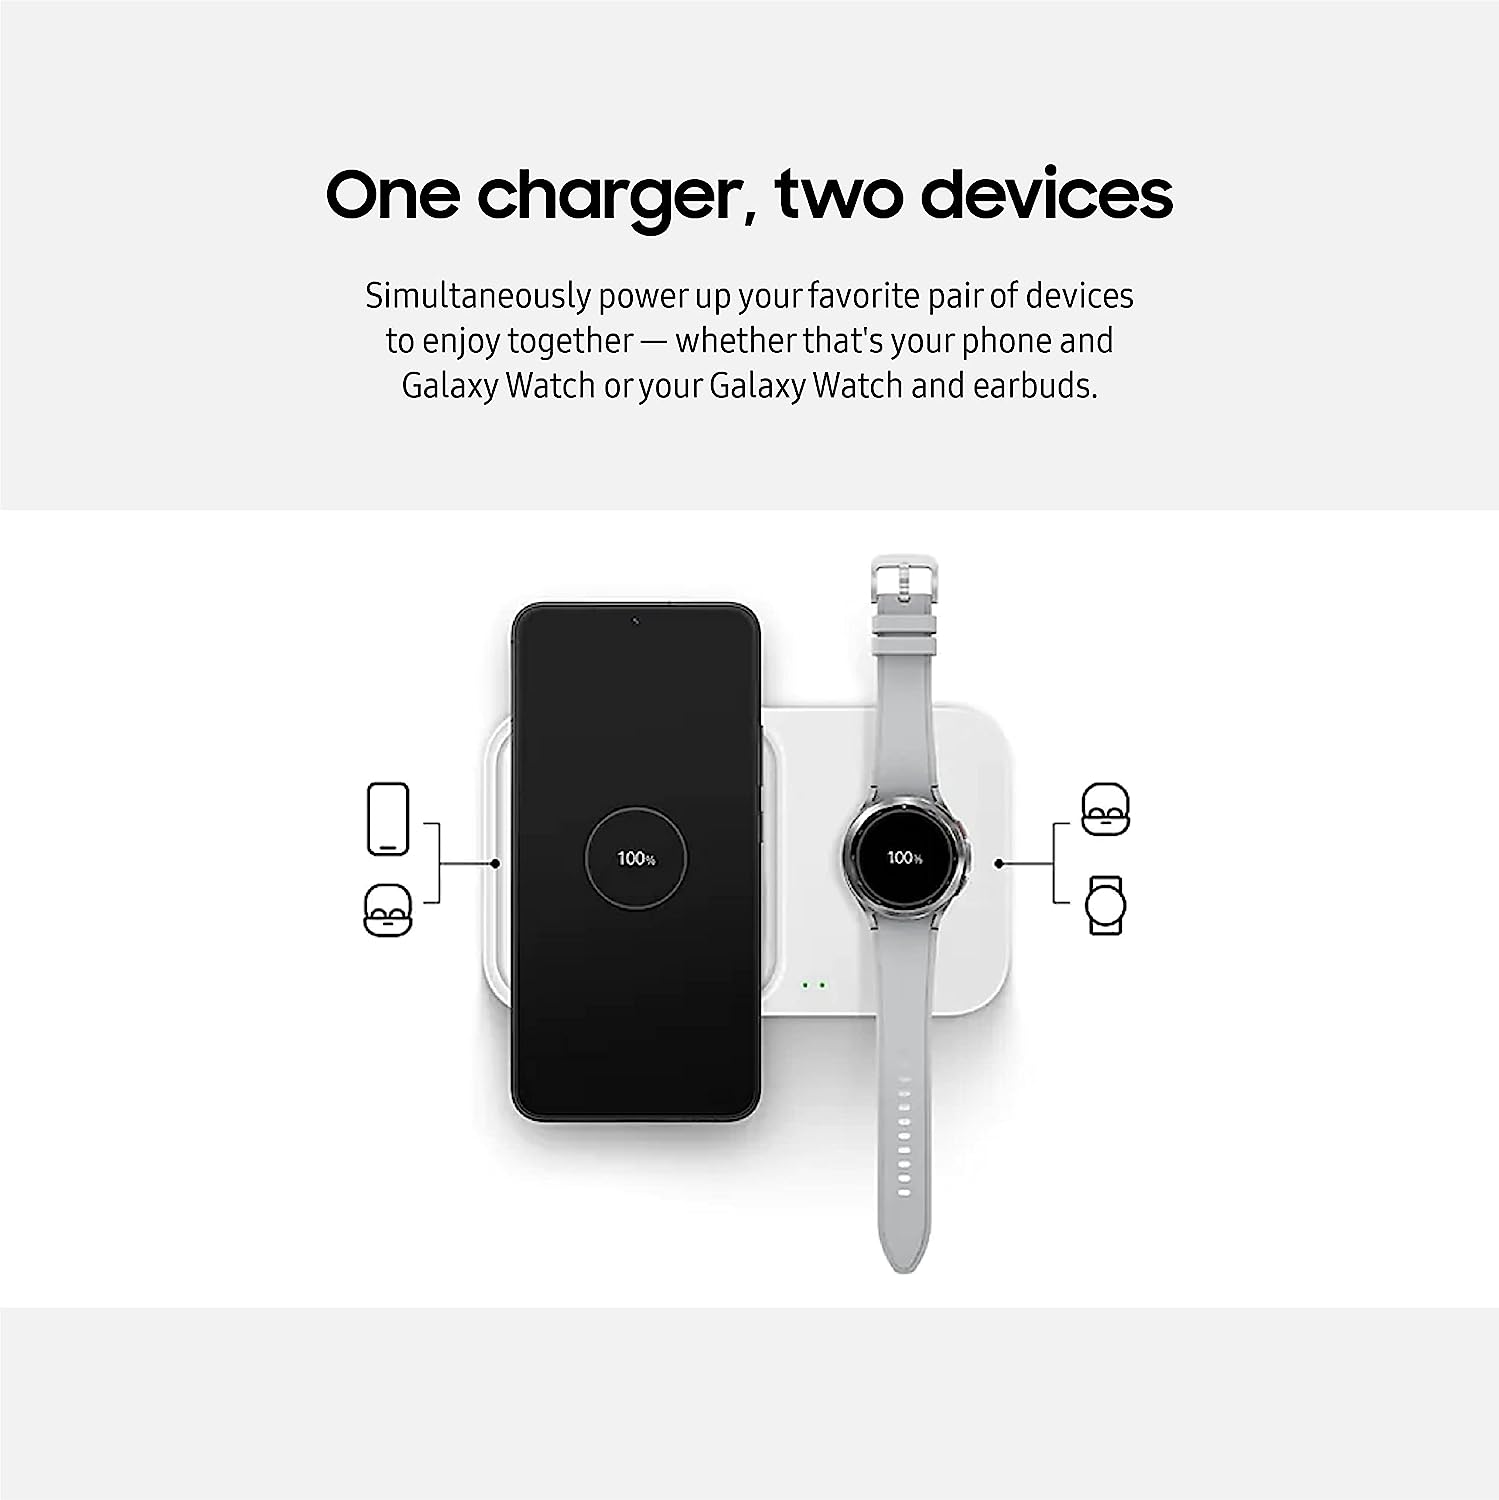 SAMSUNG 15W Wireless Charger Duo Super Fast Charging Pad for Galaxy Phones and Devices - Black